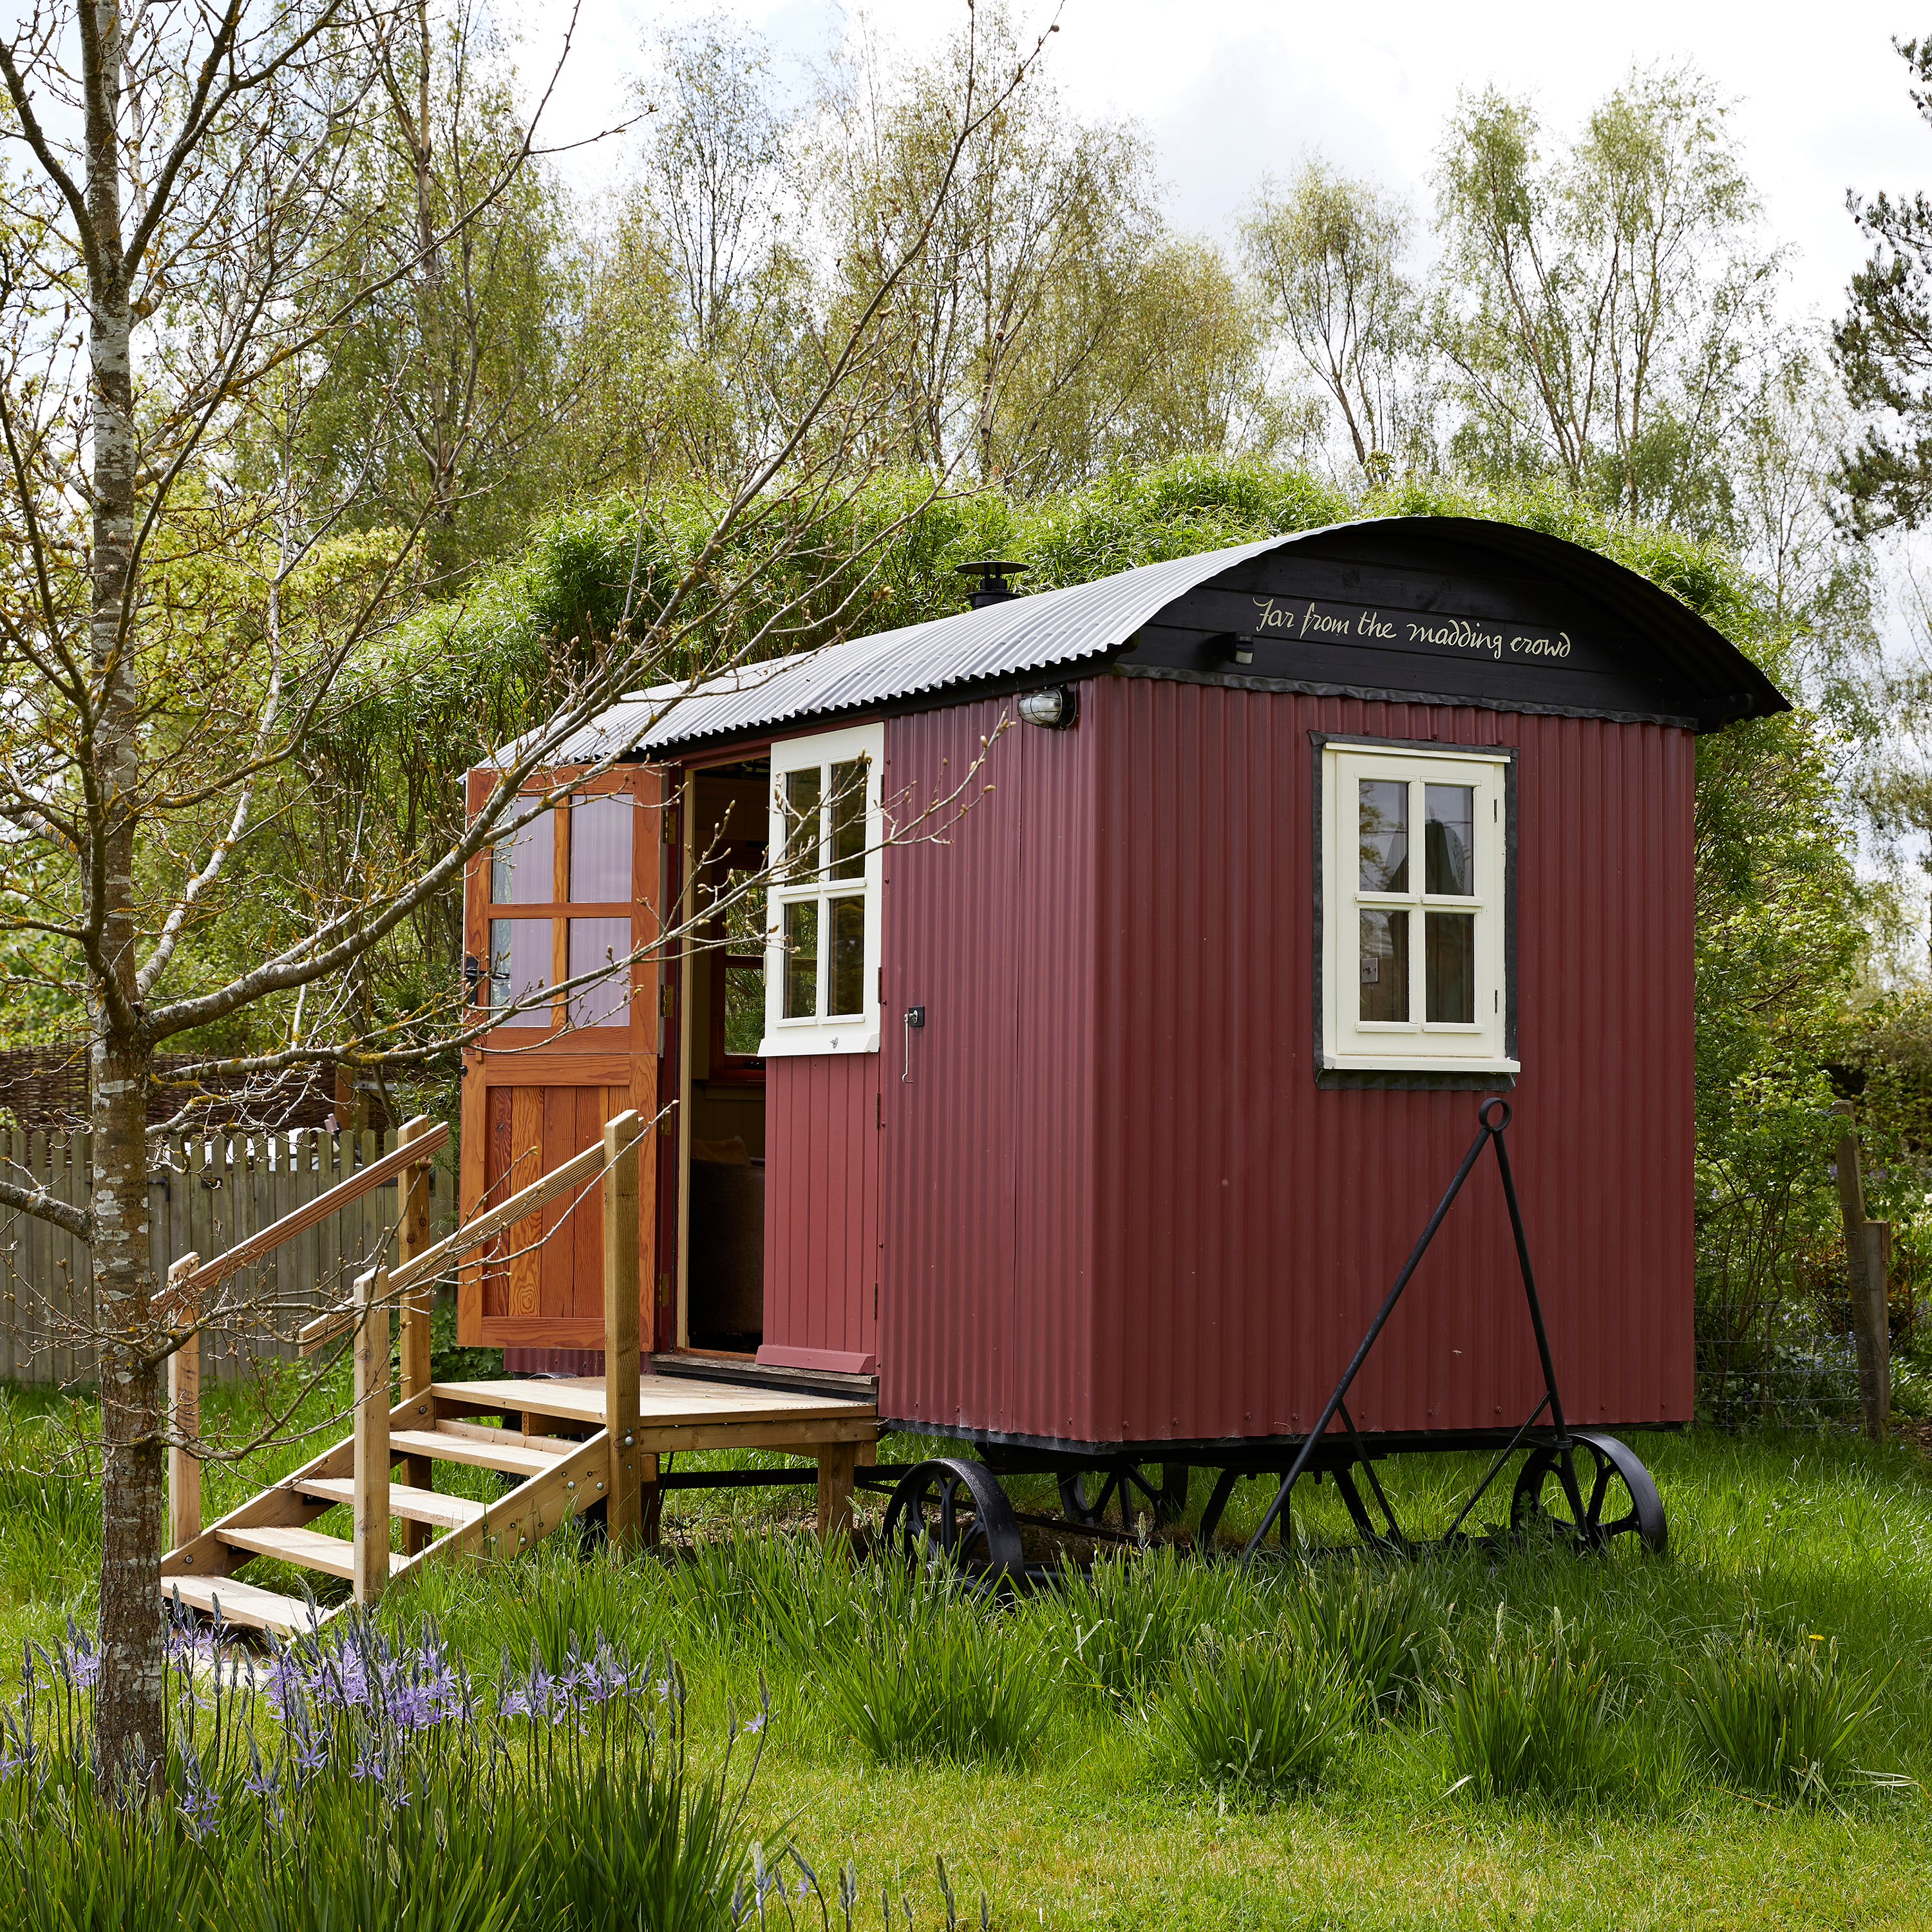 The story of the shepherd's hut